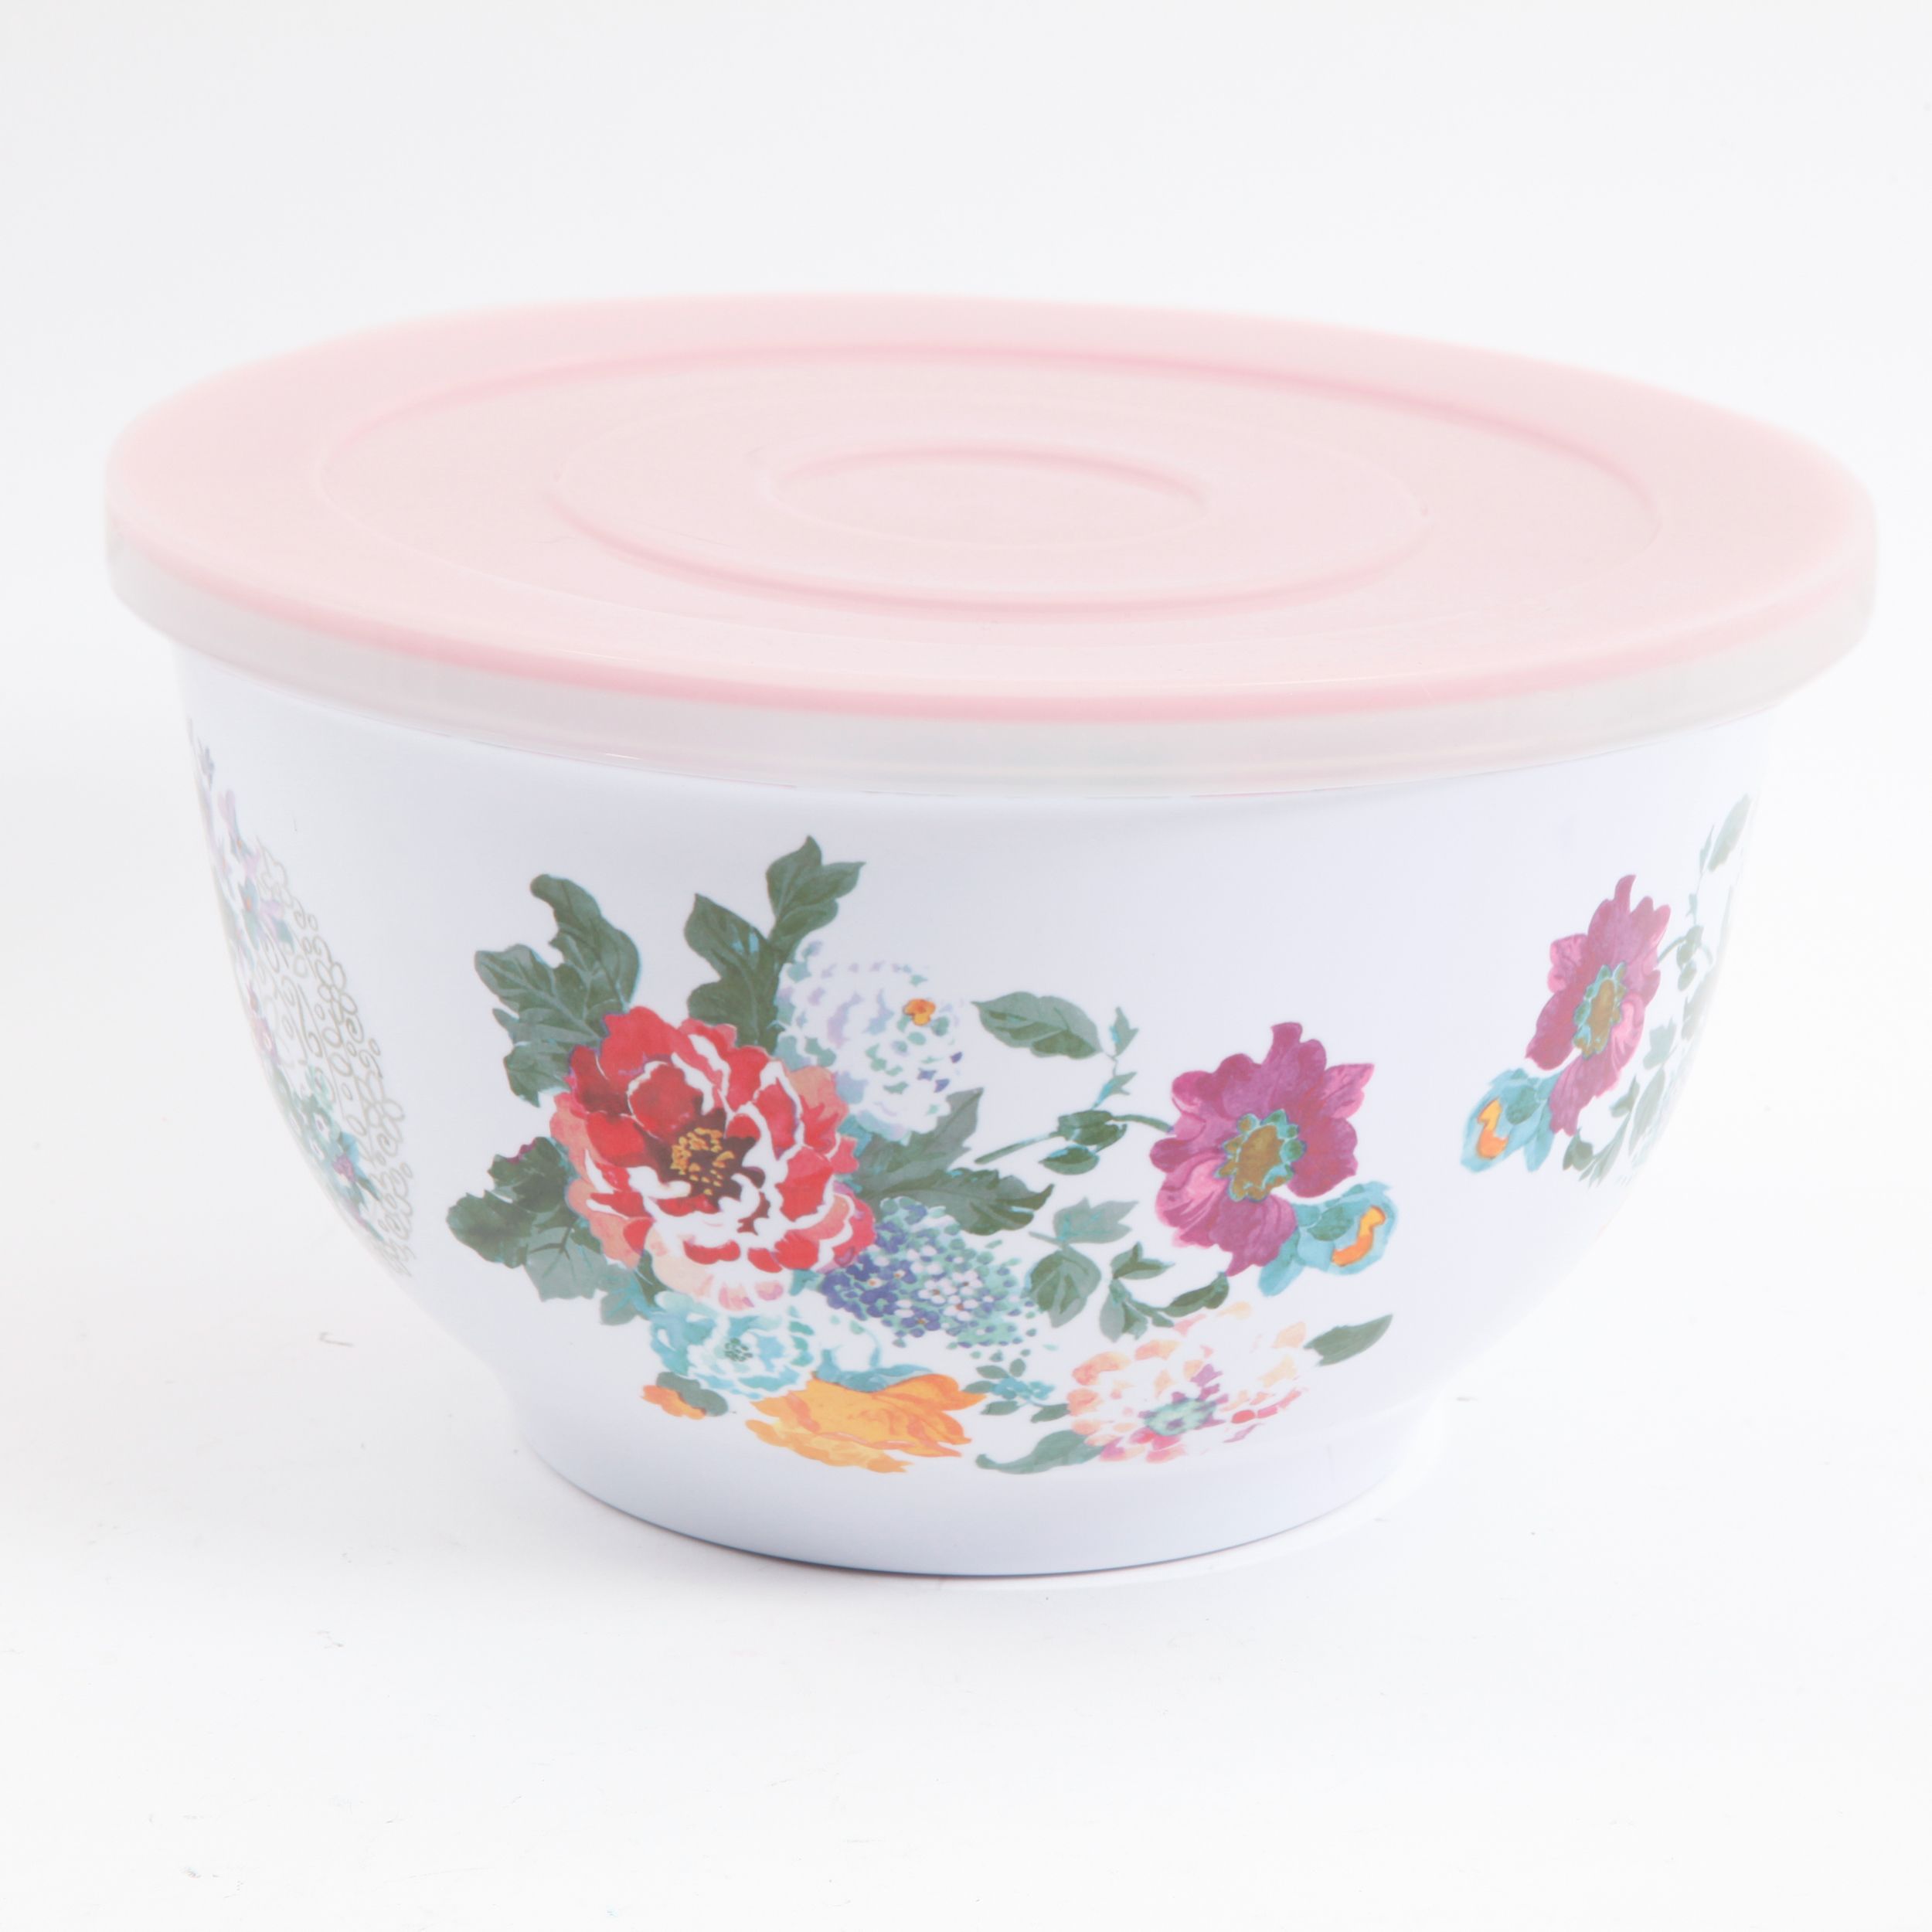 The Pioneer Woman Melamine Mixing Bowls